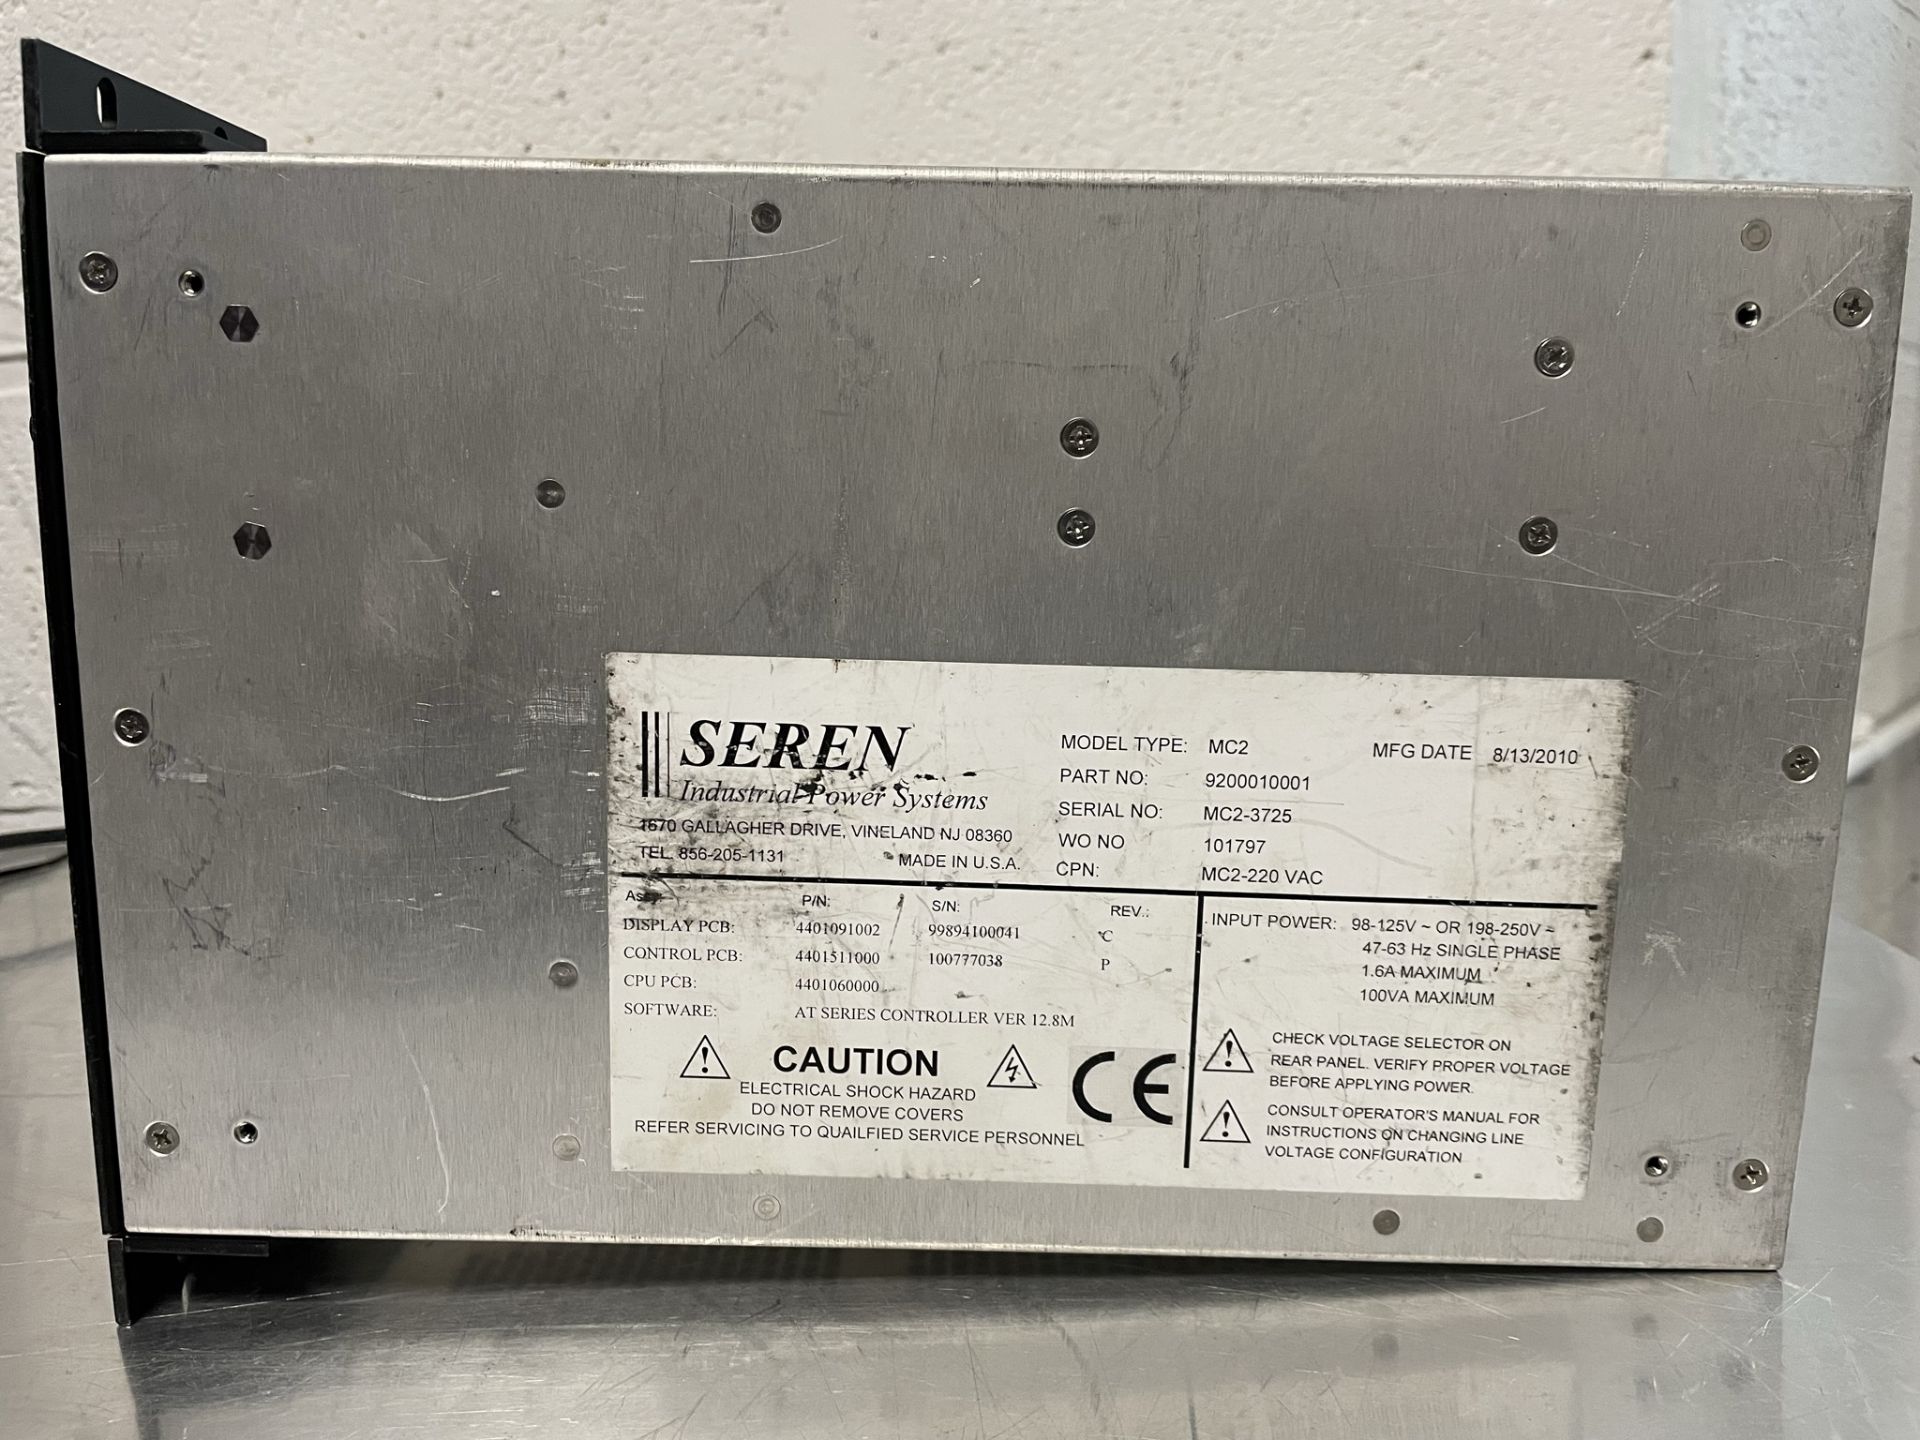 SEREN Industrial Power Systems MC2 Matching Network Controller - Image 4 of 6